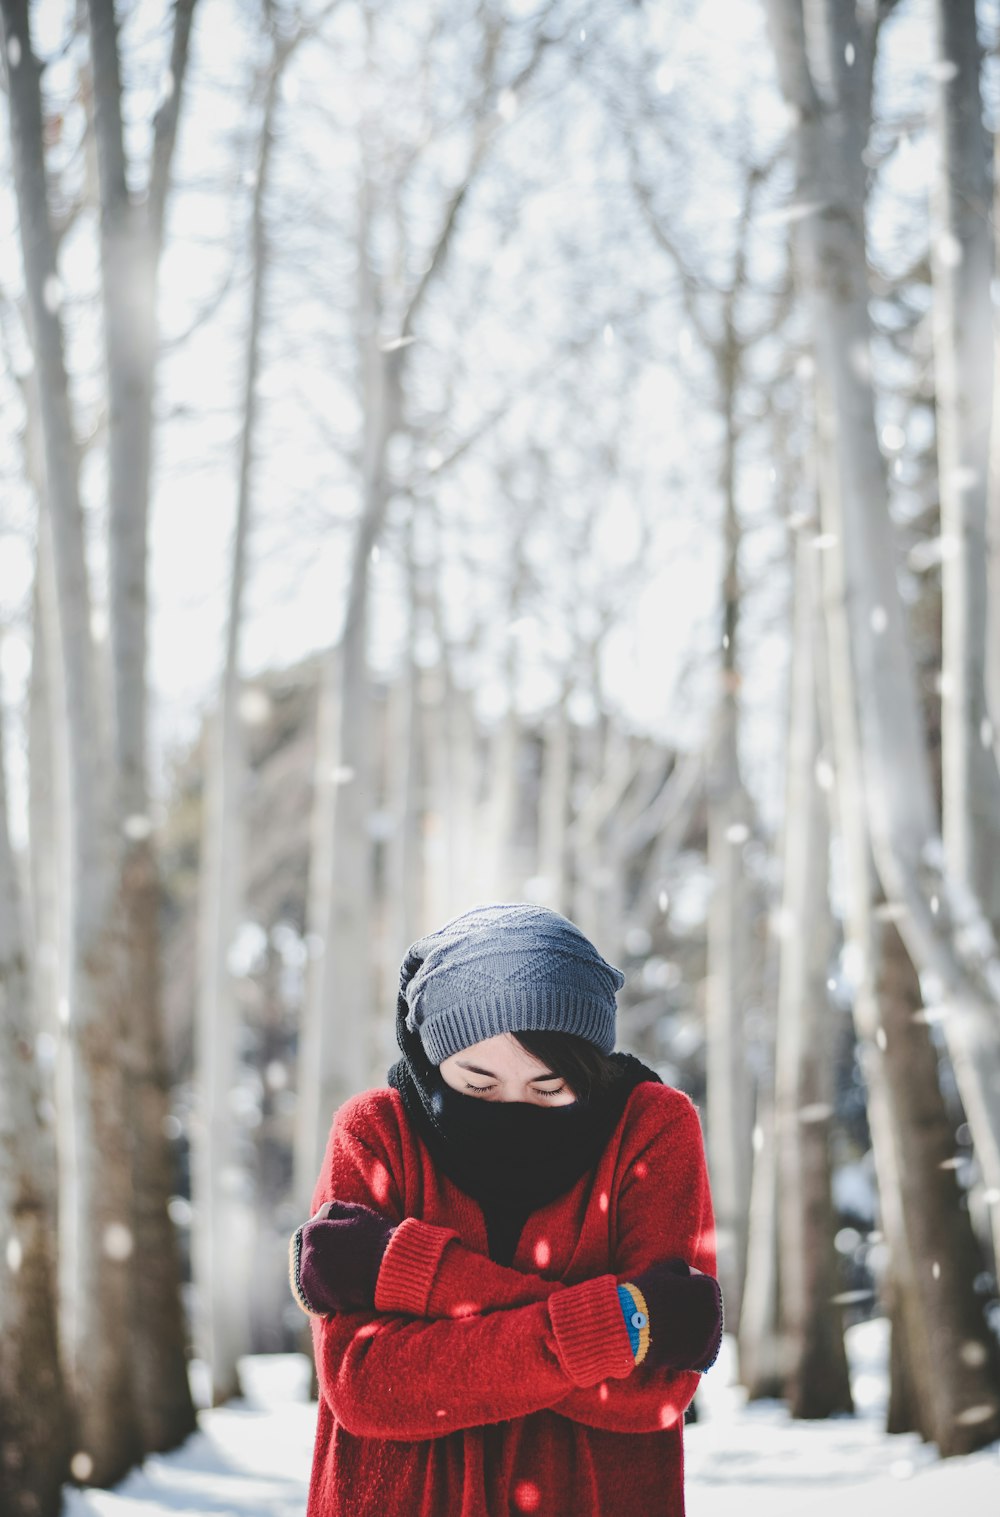 person in red jacket wearing blue knit cap standing near snow covered trees during daytime